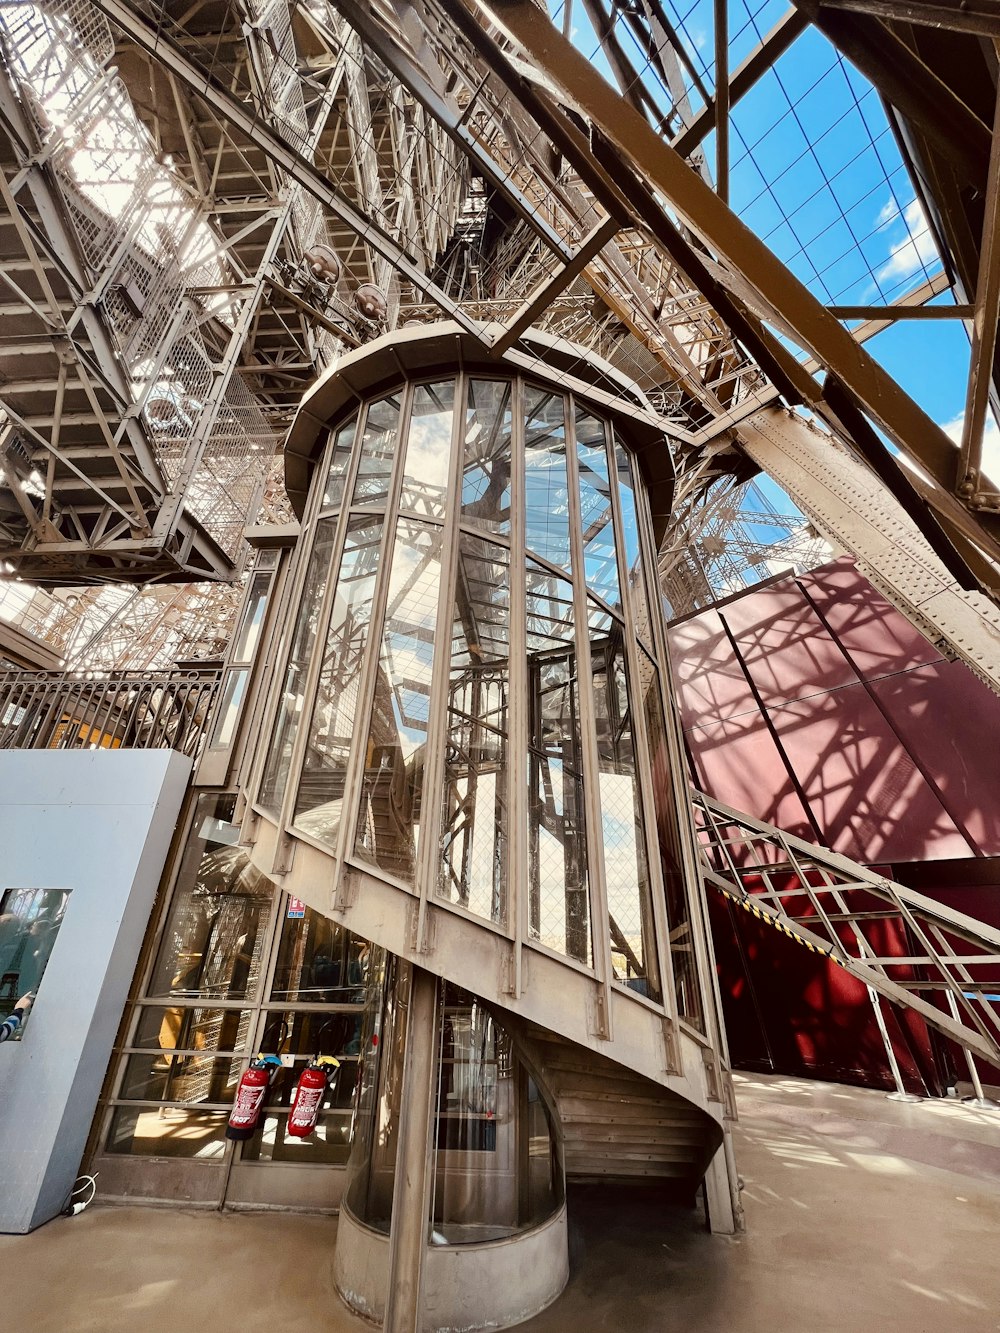 the inside of a building with a spiral staircase